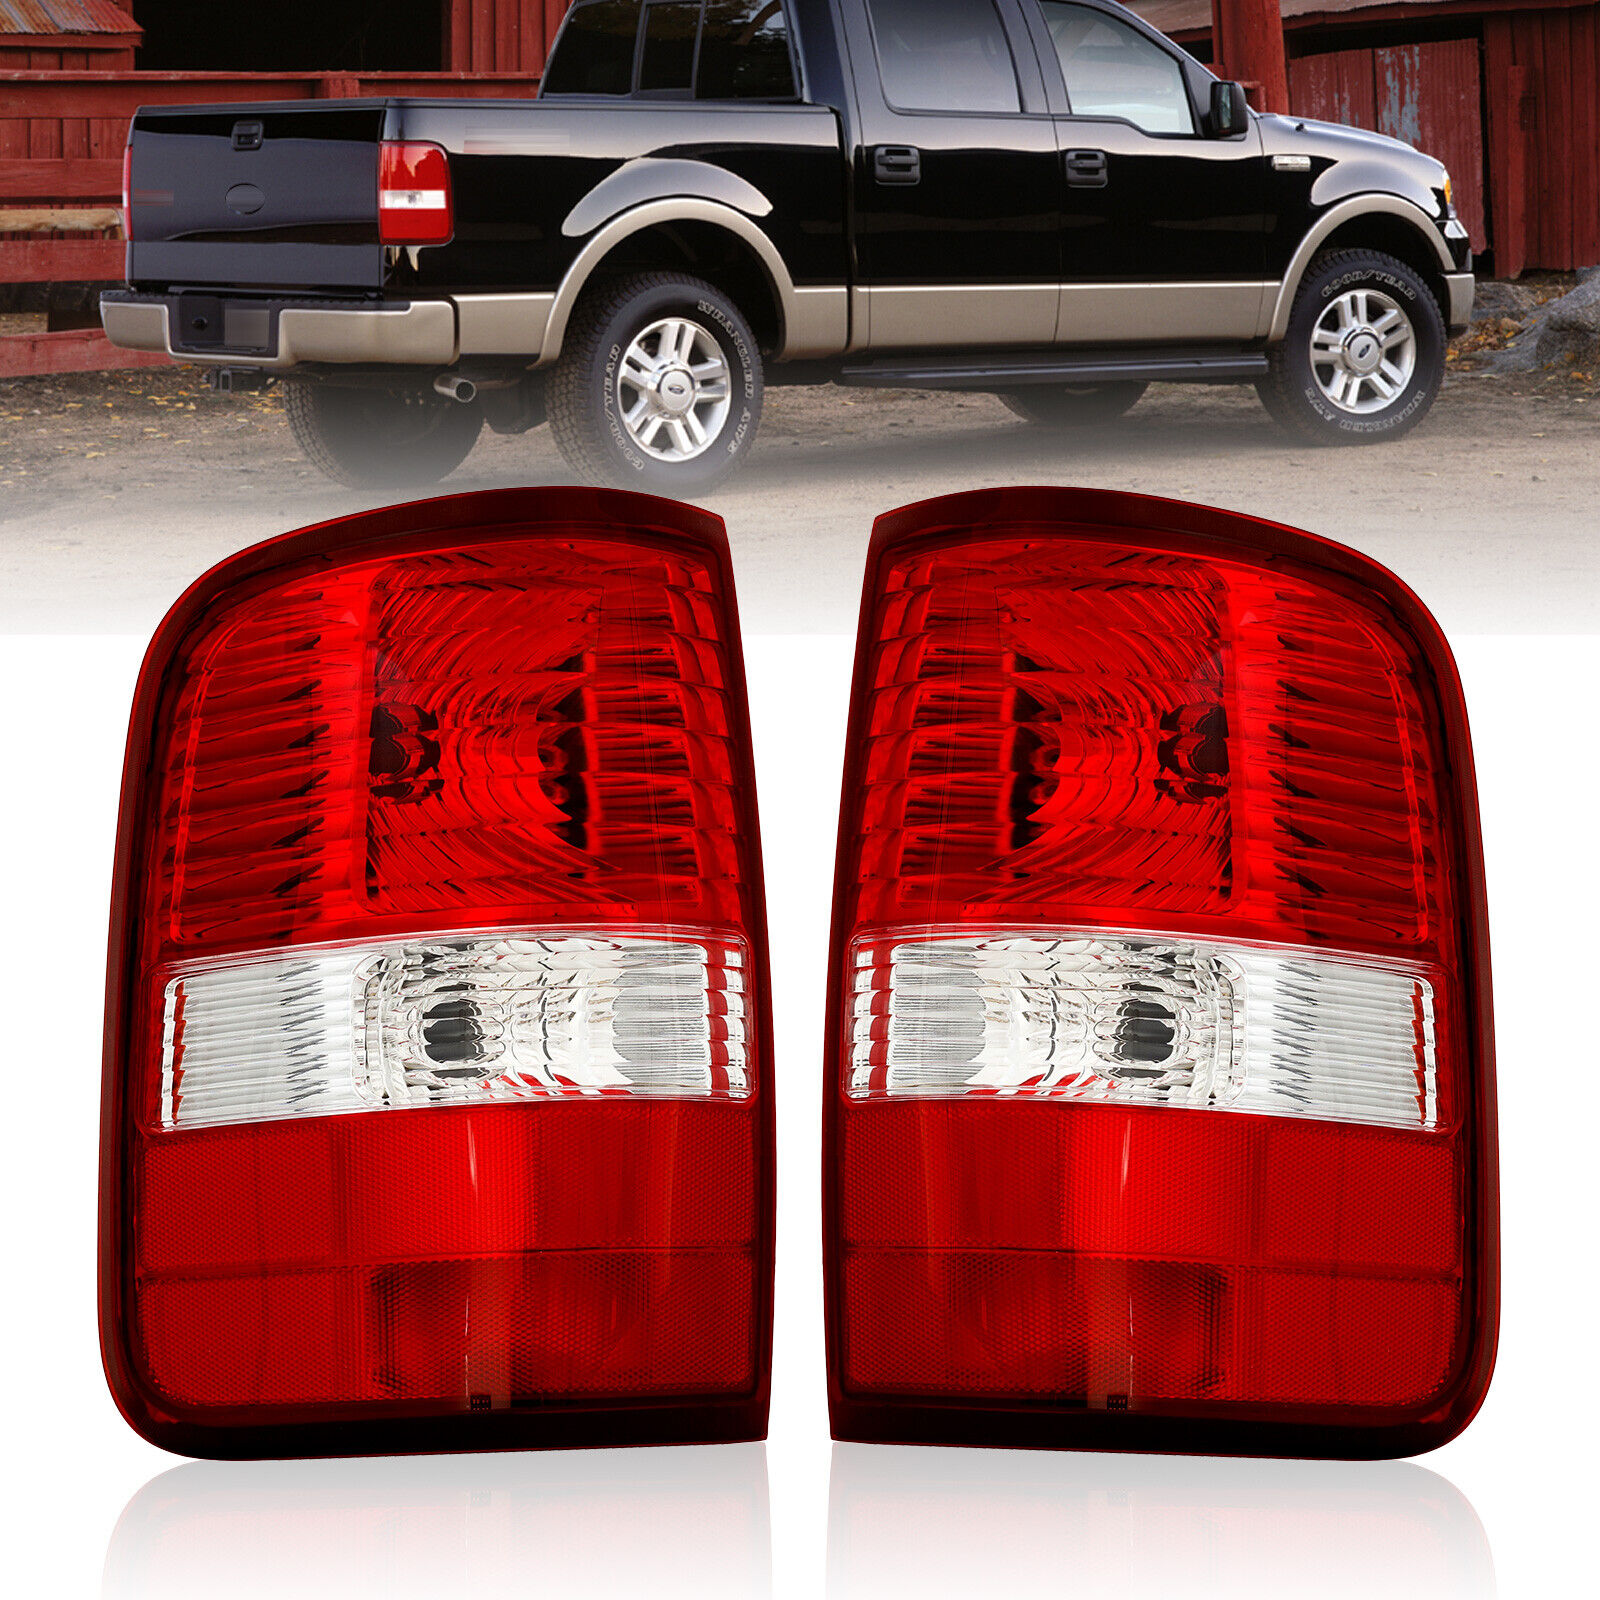 New Red Lens Tail Light Set For Ford F-150 2004-2008 Driver and Passenger Side